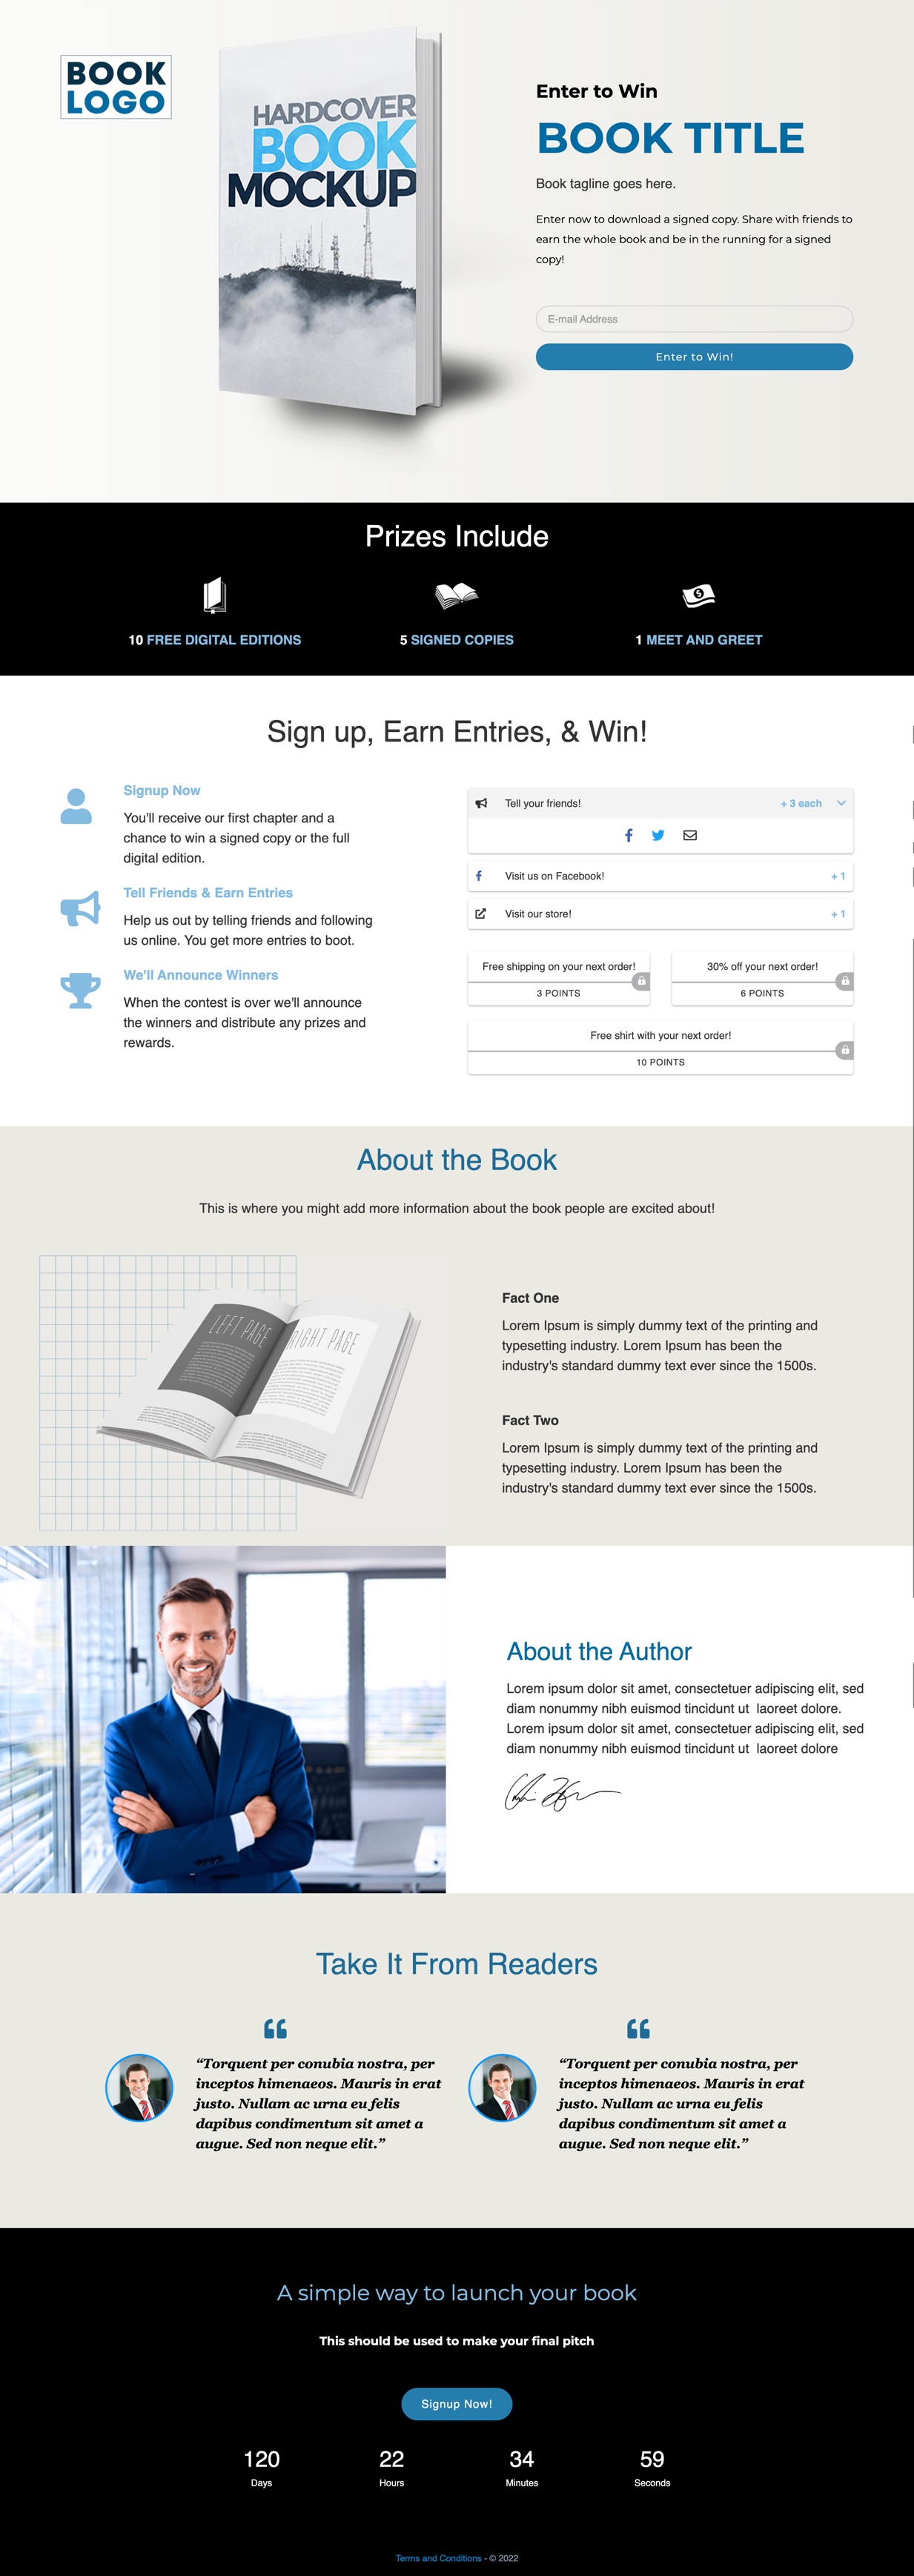 Landing Page Template: Enter to Win Book Launch Contest - Contest